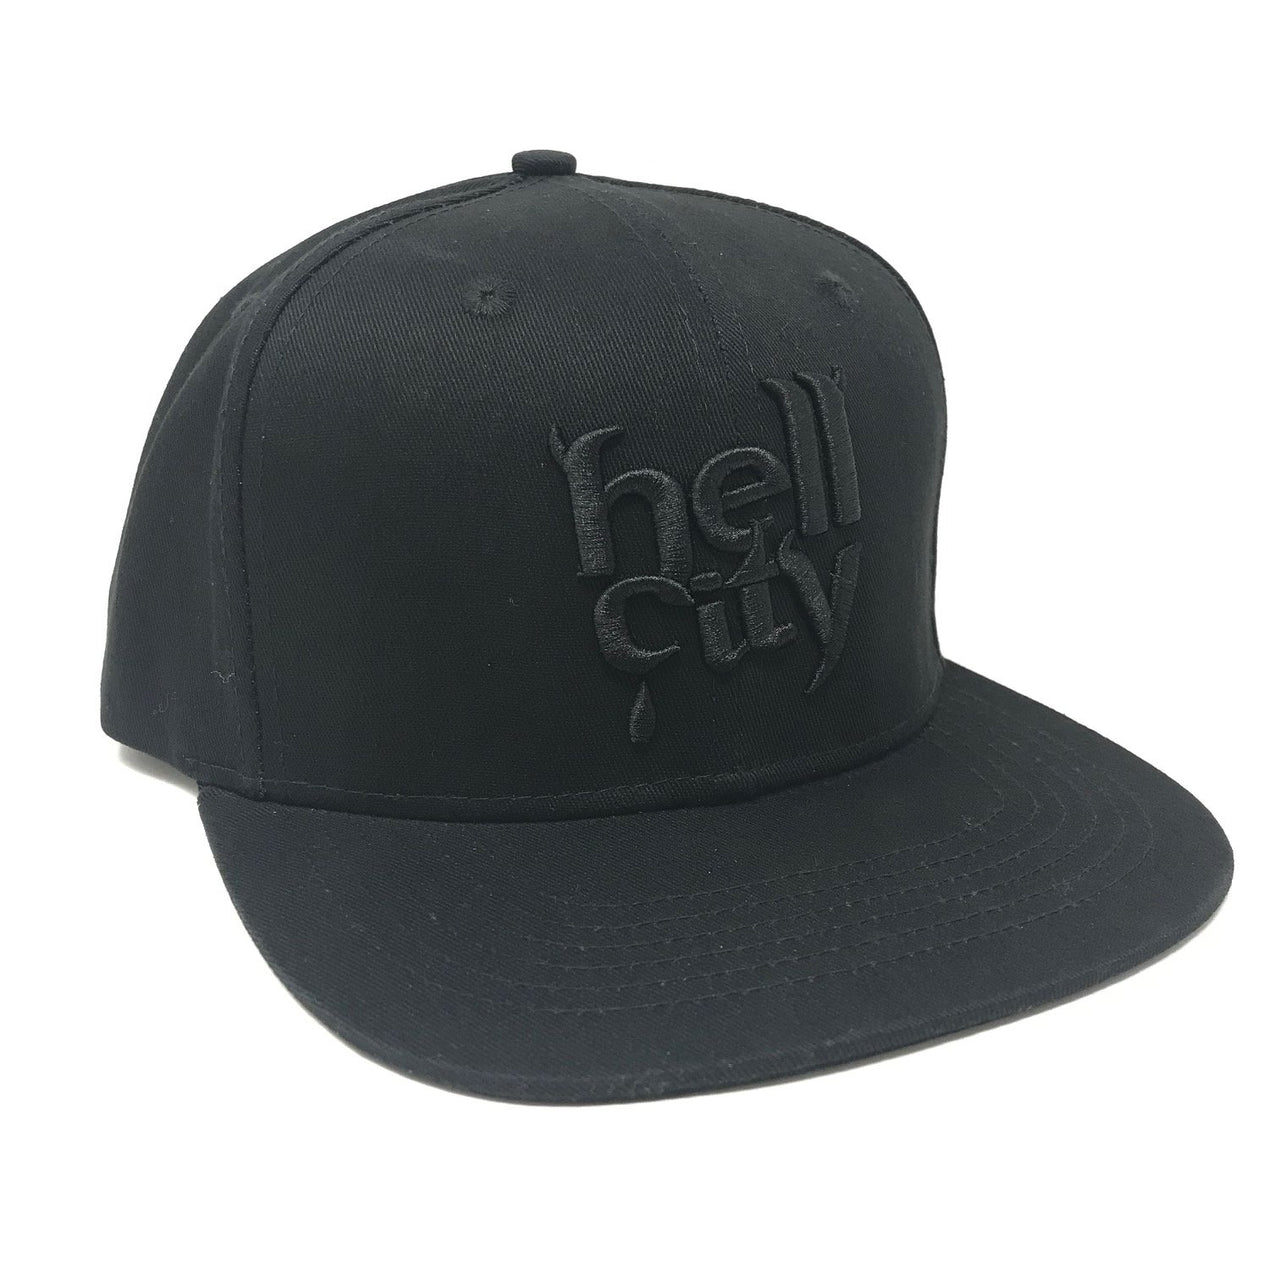 Available at True Tattoo Supply. The all NEW Hell City Black Logo Hat is a Hell City legendary hat! Super cozy Flat Rim, Snap Back Tattoo Hat from Hell!  Grab yours today! One size fits all! All Black Hat, Black threading, Black snapback.